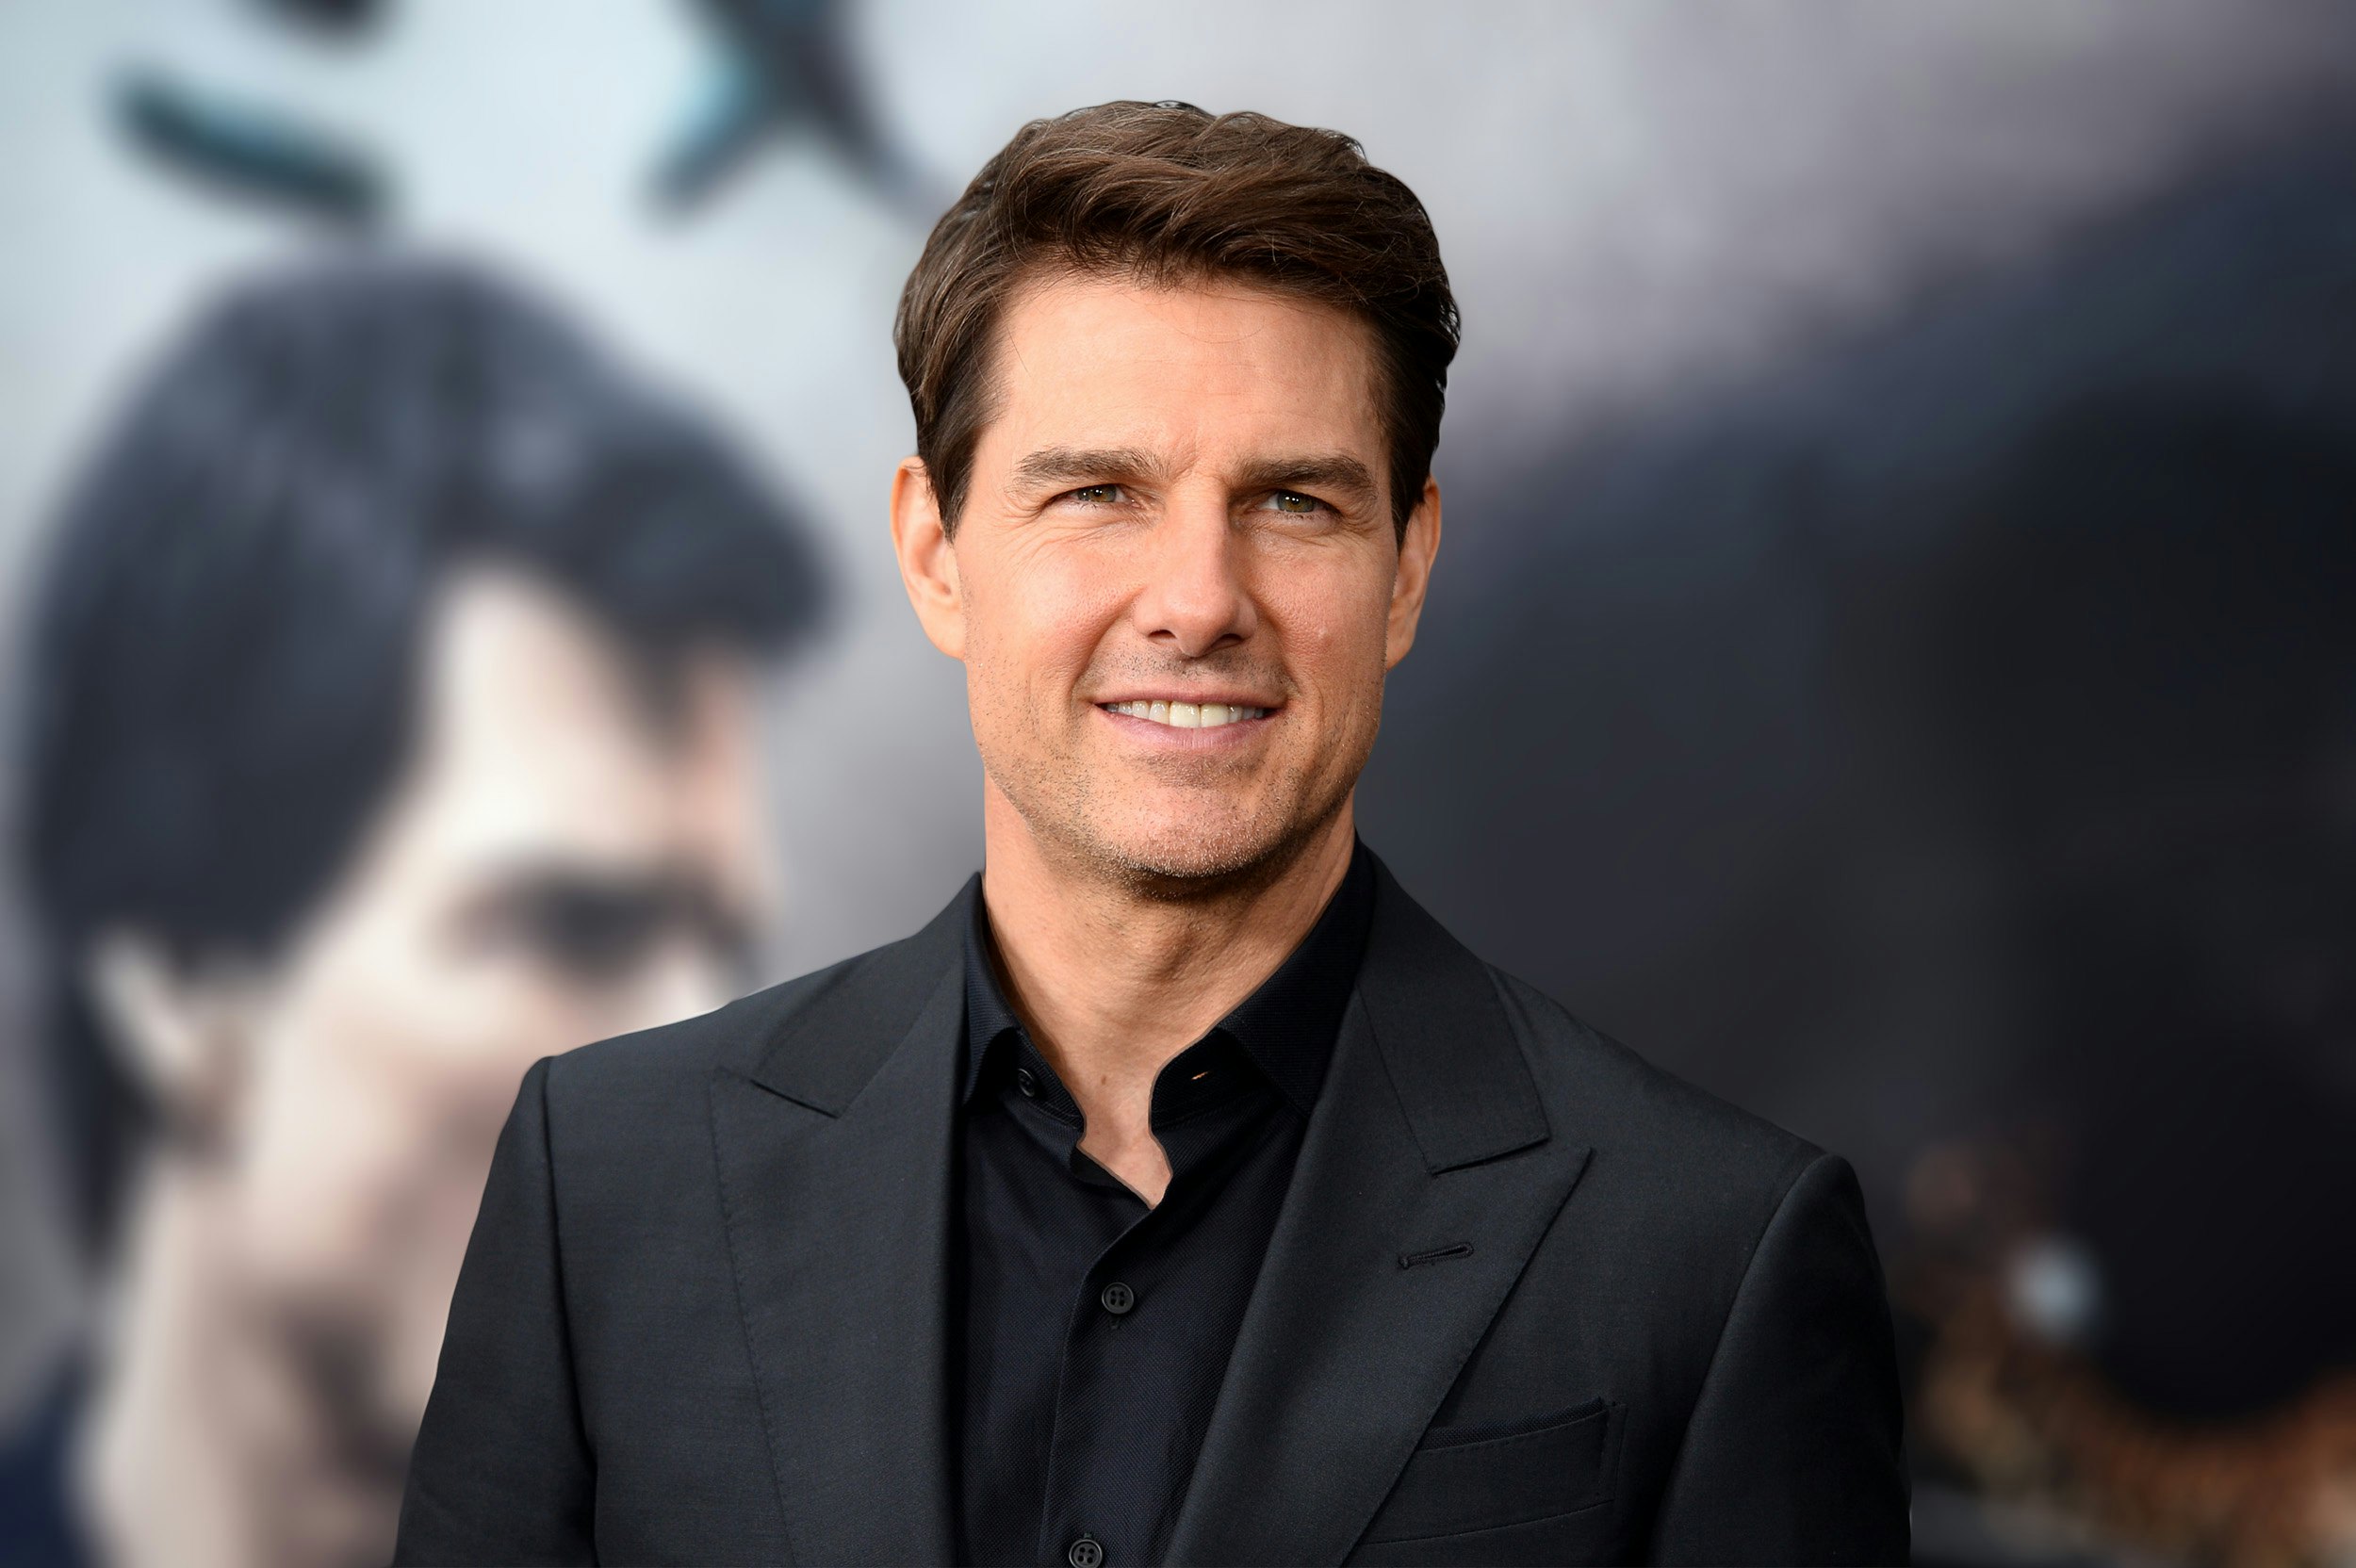 Sony PIX on Twitter Tom Cruise with long hair or short hair ToughChoice  httptcobZ1GtxhMez  Twitter